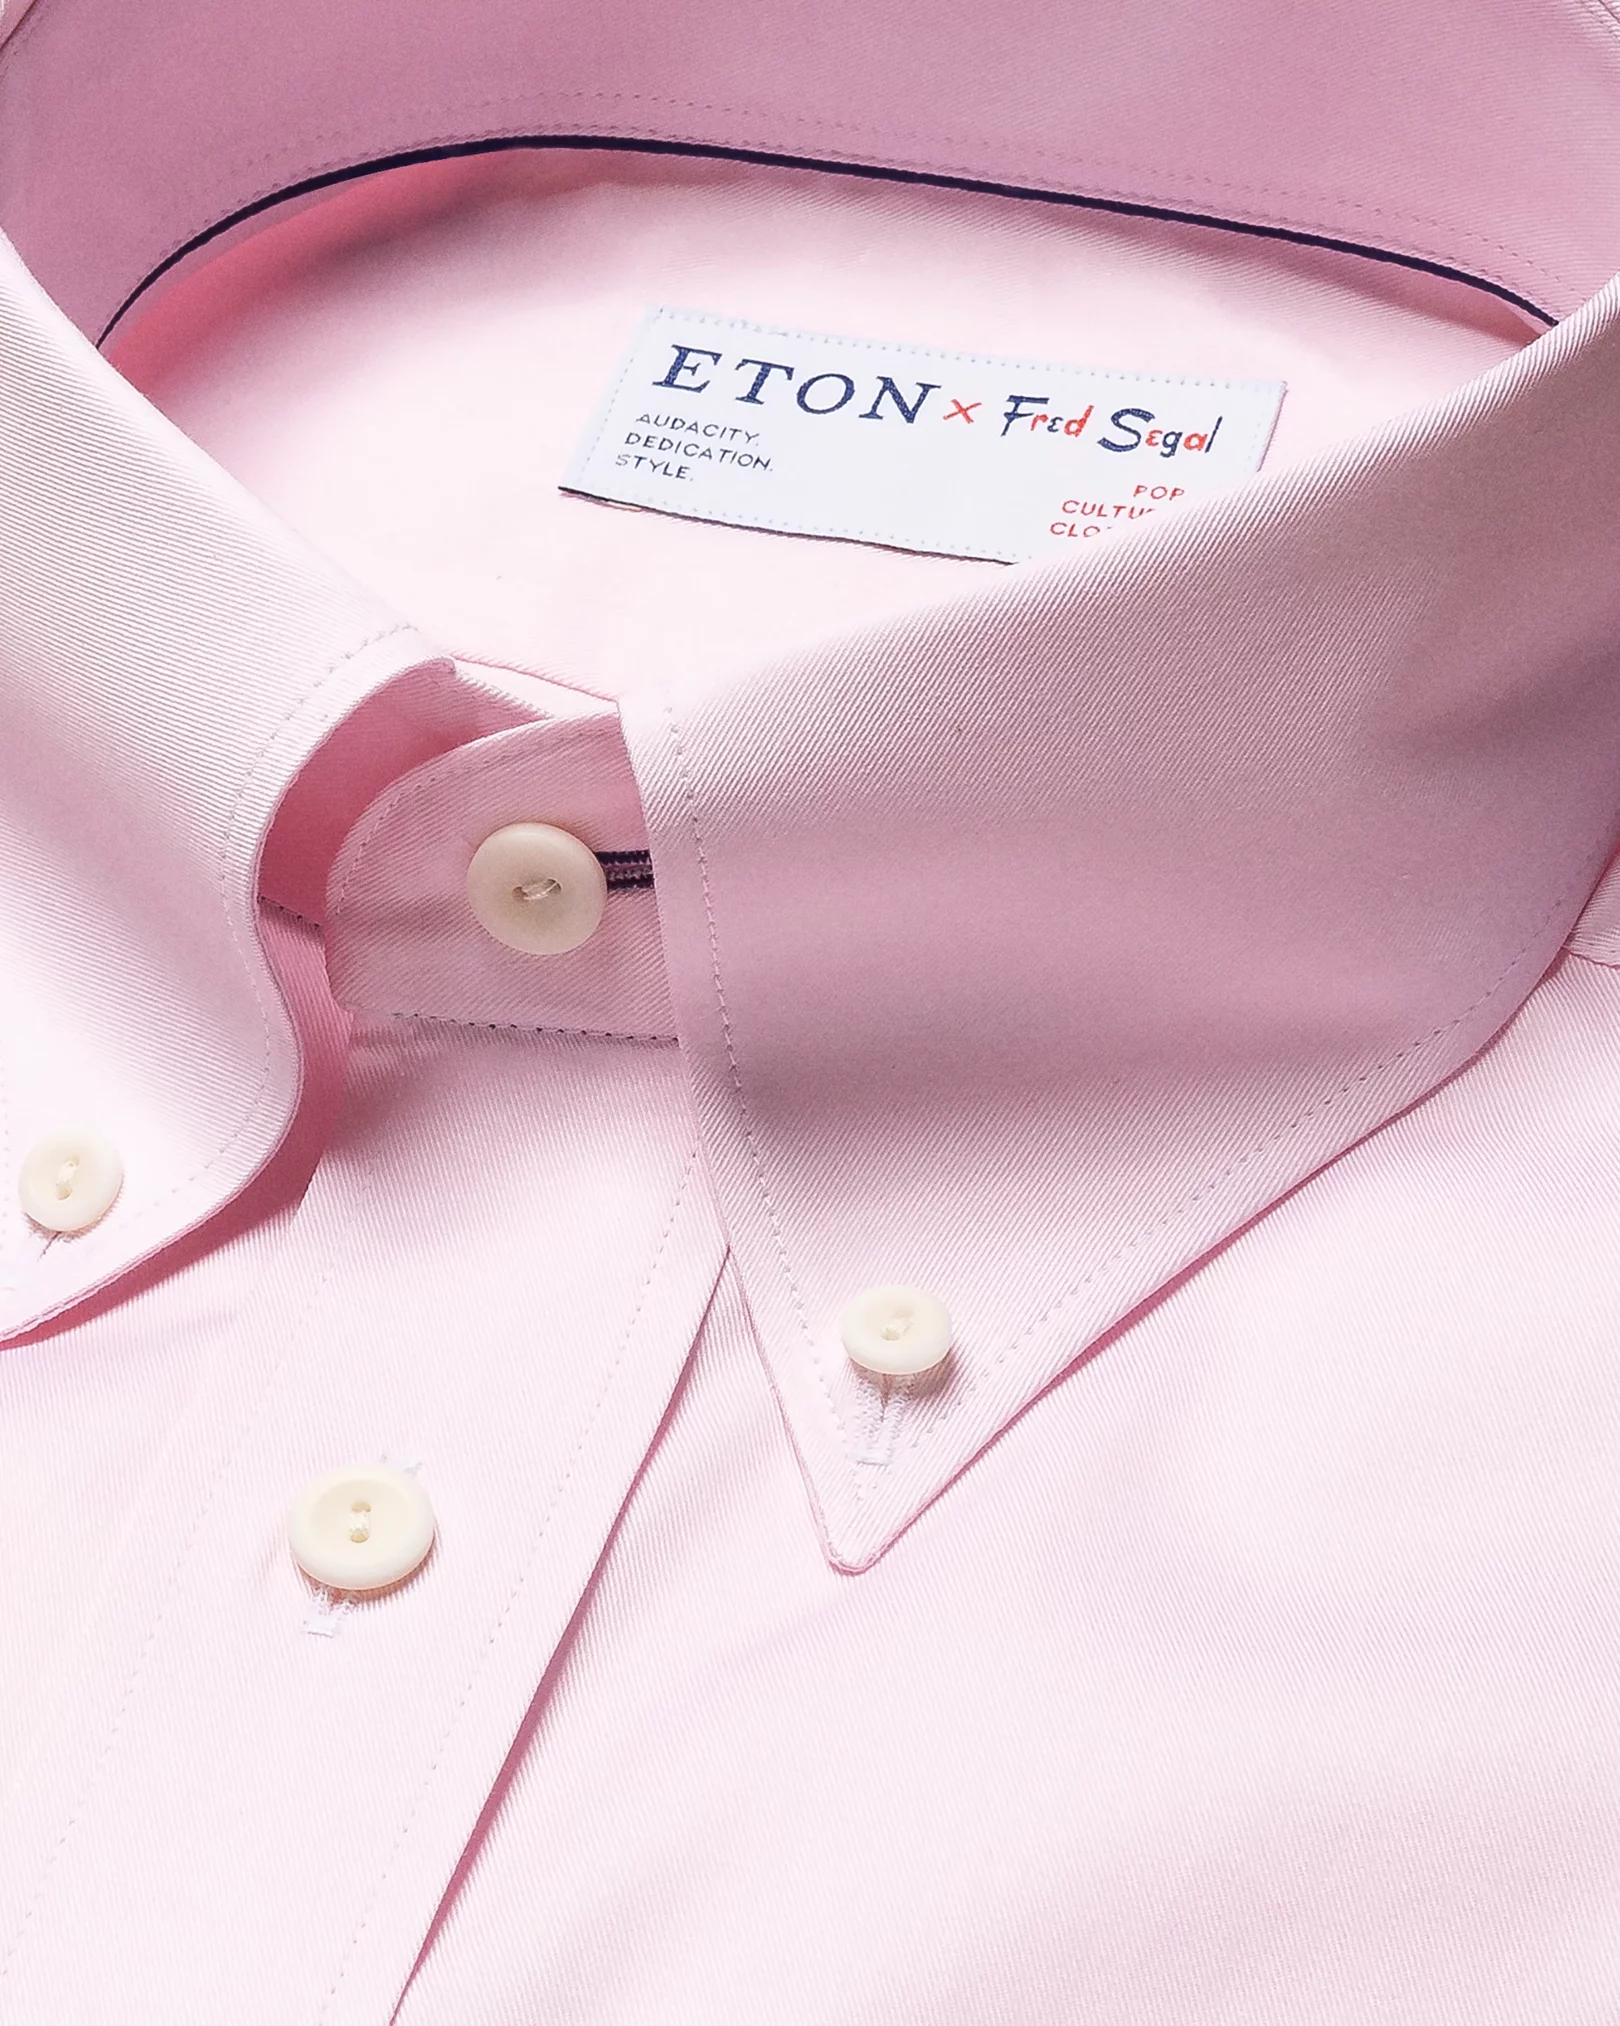 Eton - pink signature twill button down fred segal